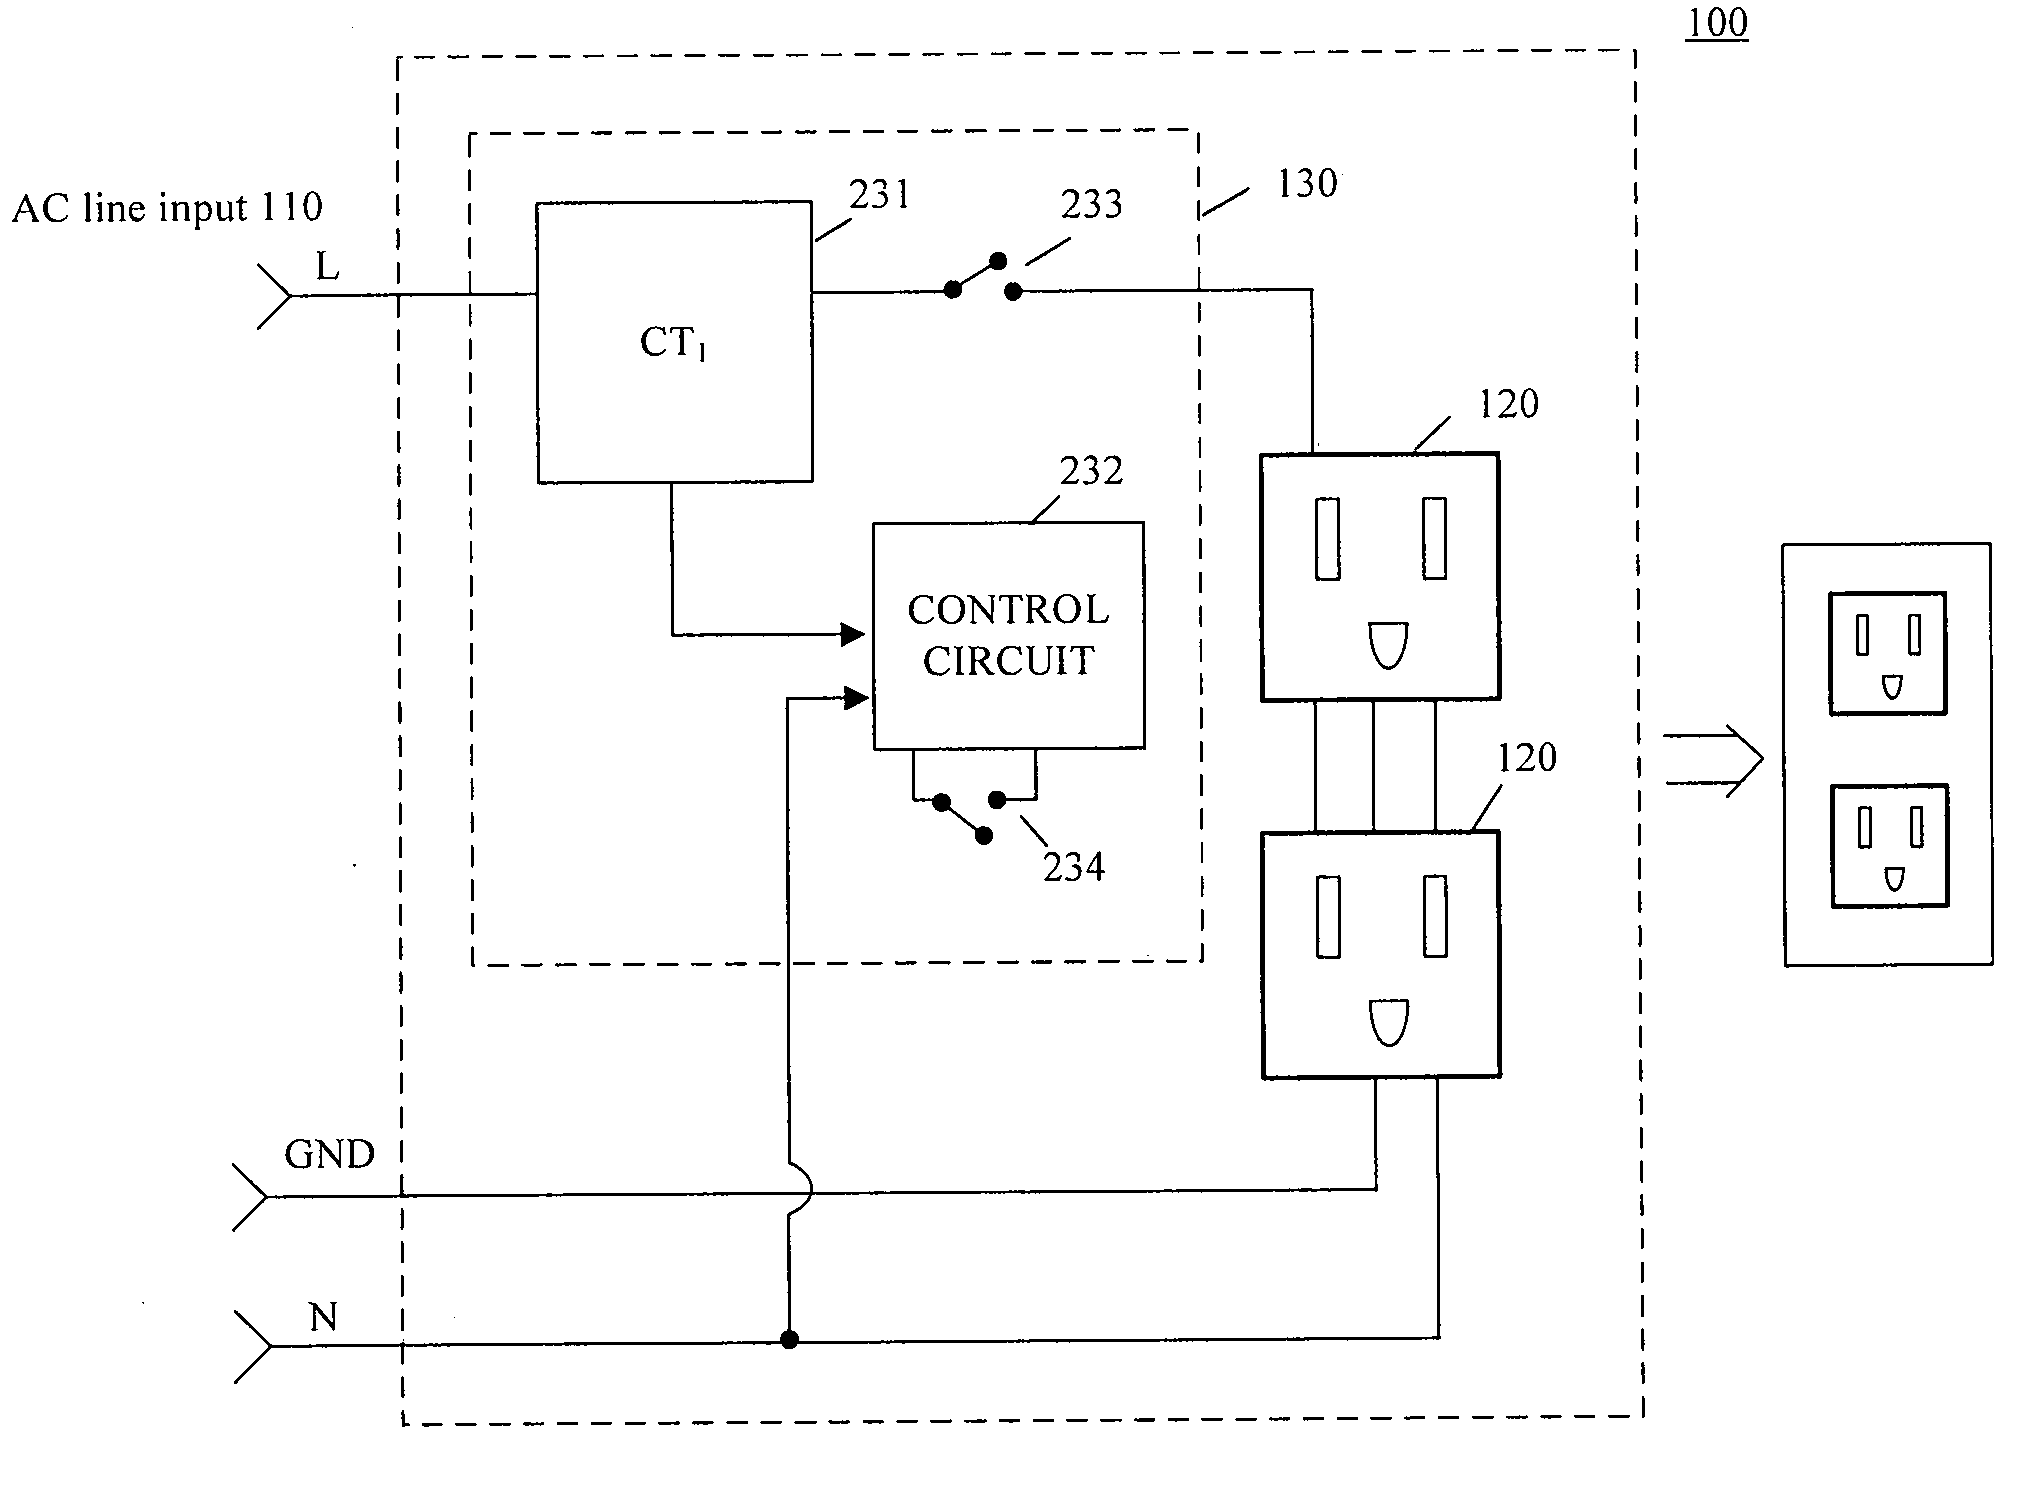 Load condition controlled wall plate outlet system